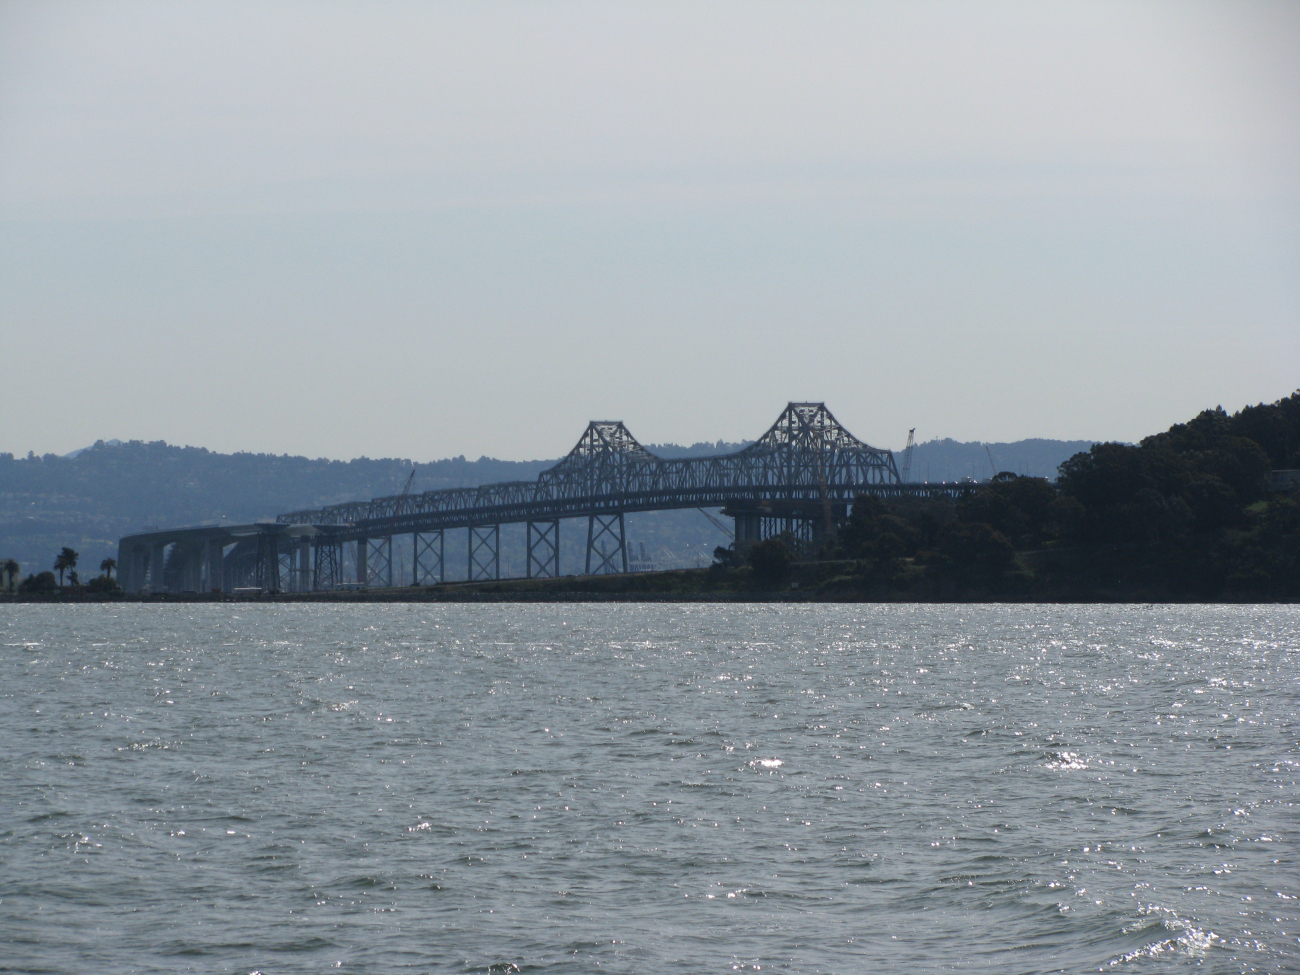 East span of the San Francisco Bay Bridge seen from the north prior tothe completion of the new East Span